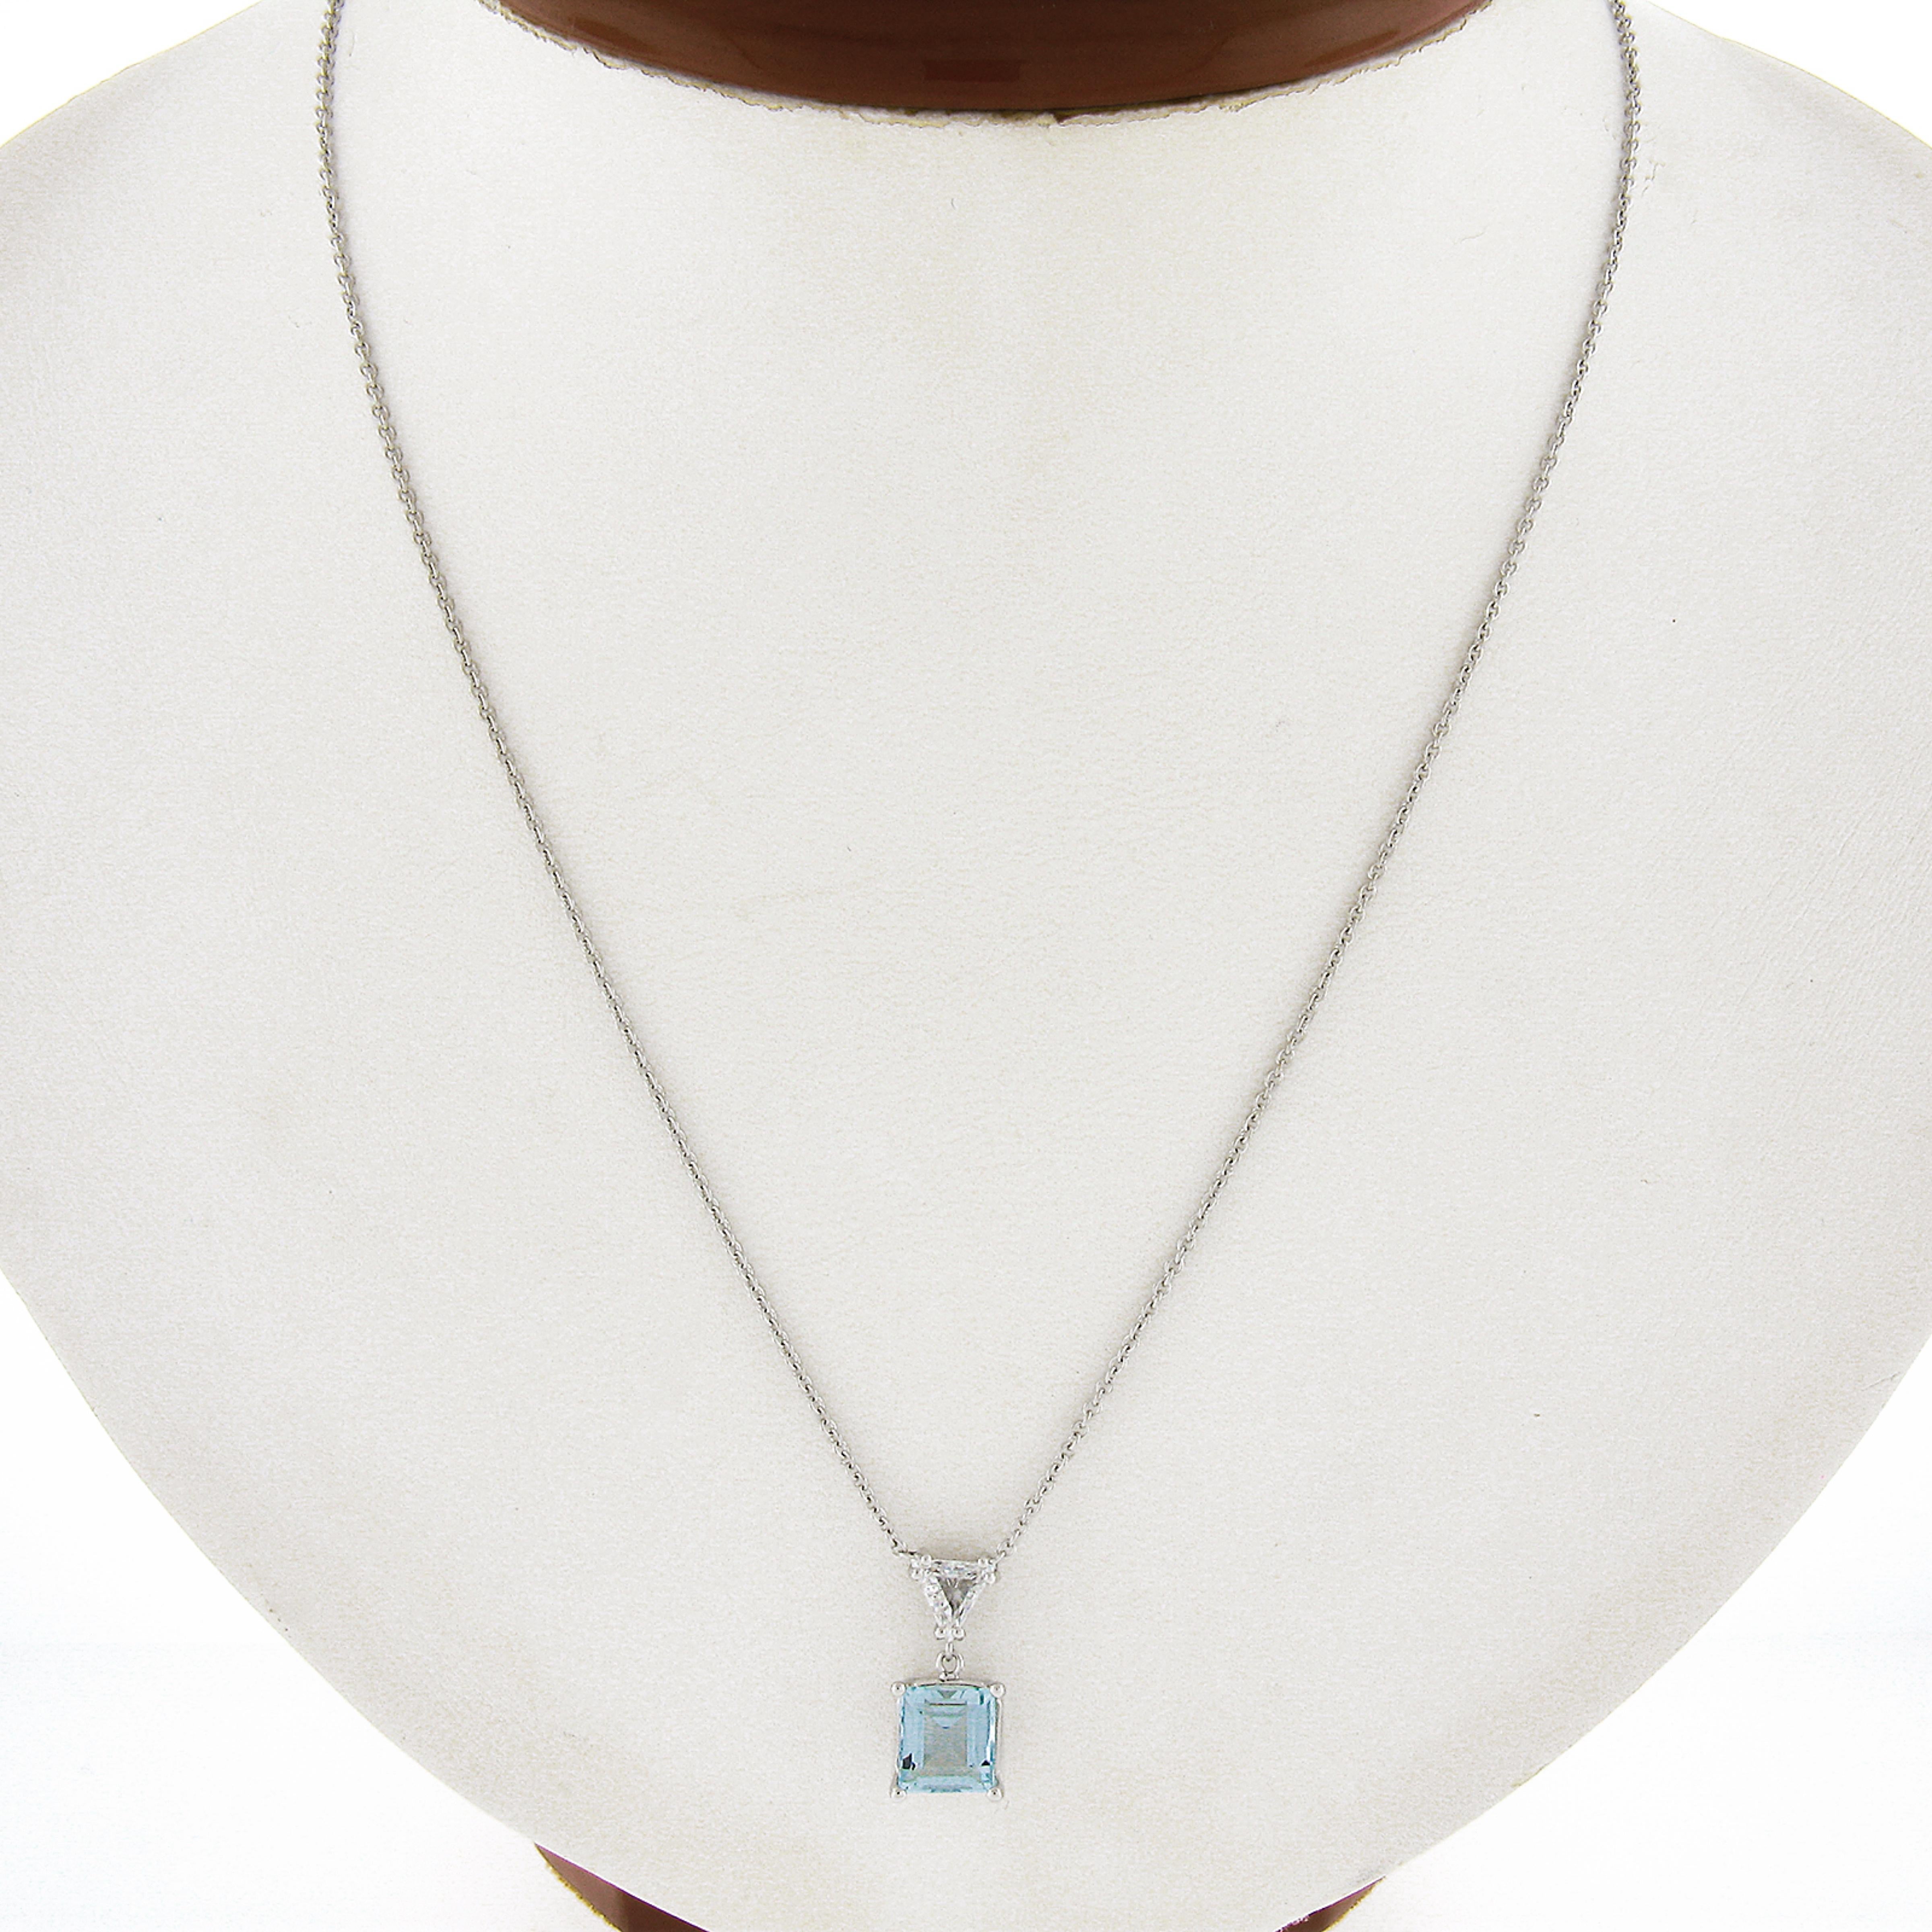 You are looking at a new custom simple and elegant styled aquamarine diamond dangle pendant necklace crafted in solid 14k white gold. The aquamarine is square step cut and neatly prong set in an open basket setting. This stunning petite solitaire